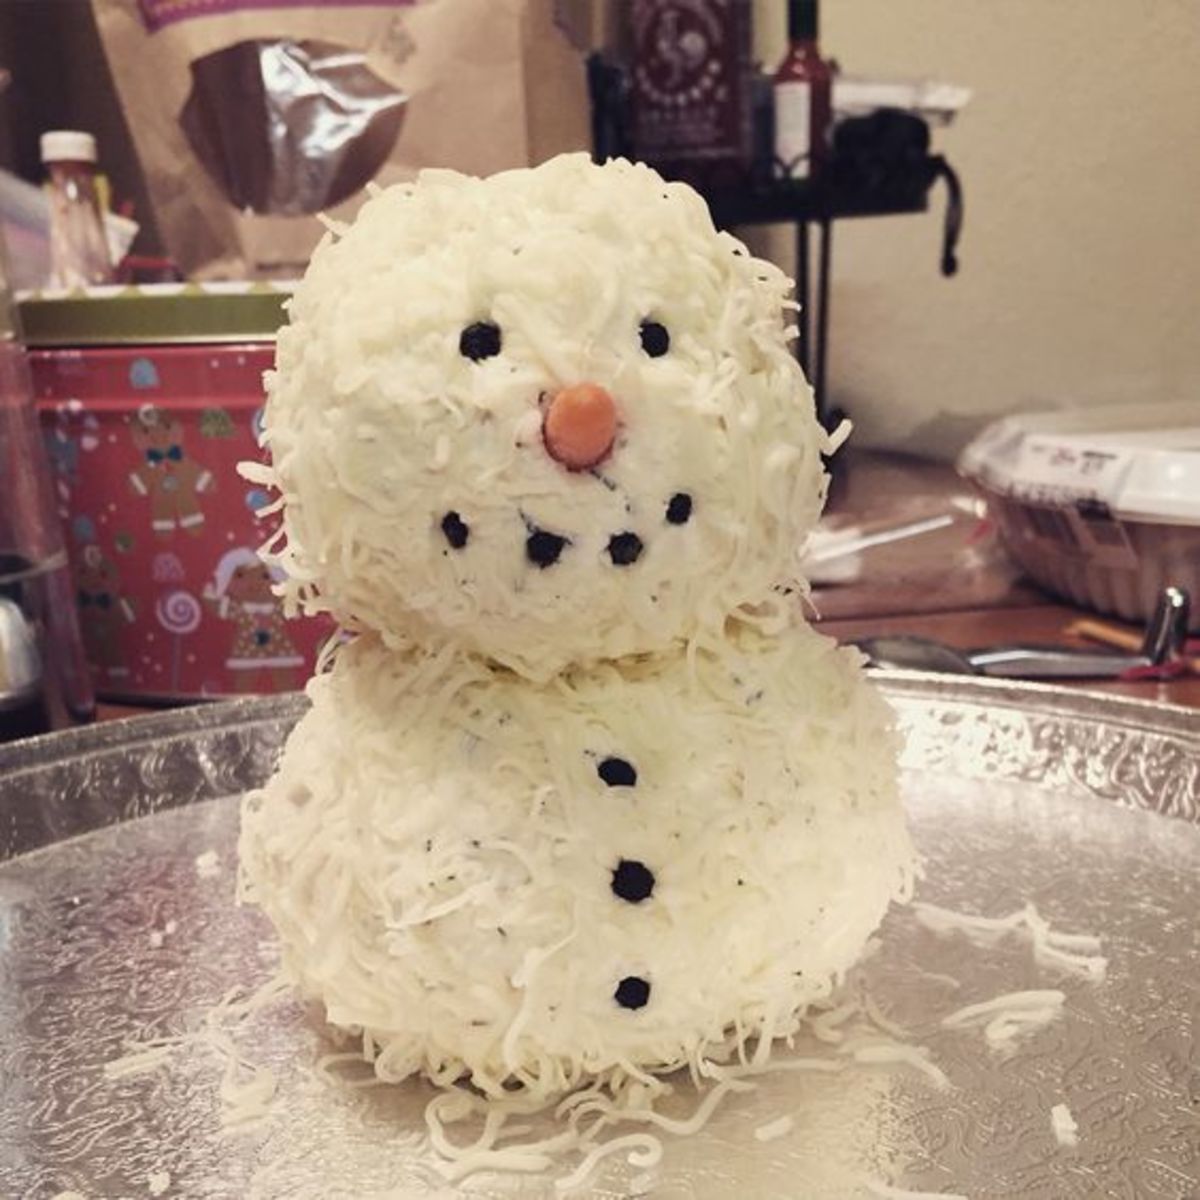 Cheesy snowman with Parmesan shreds